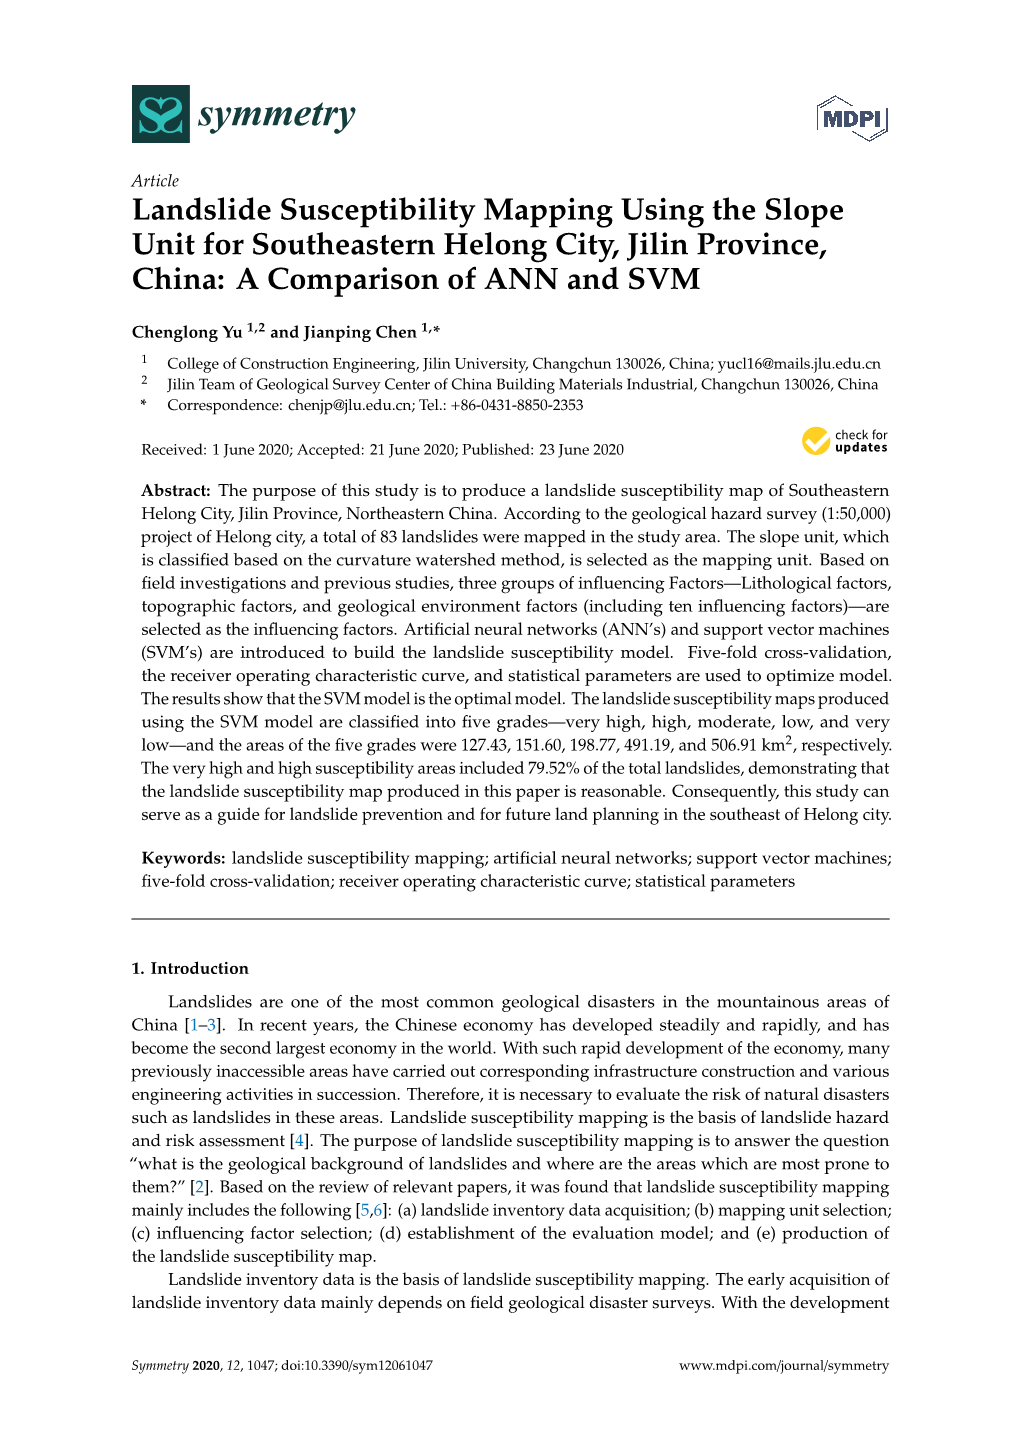 Landslide Susceptibility Mapping Using the Slope Unit for Southeastern Helong City, Jilin Province, China: a Comparison of ANN and SVM